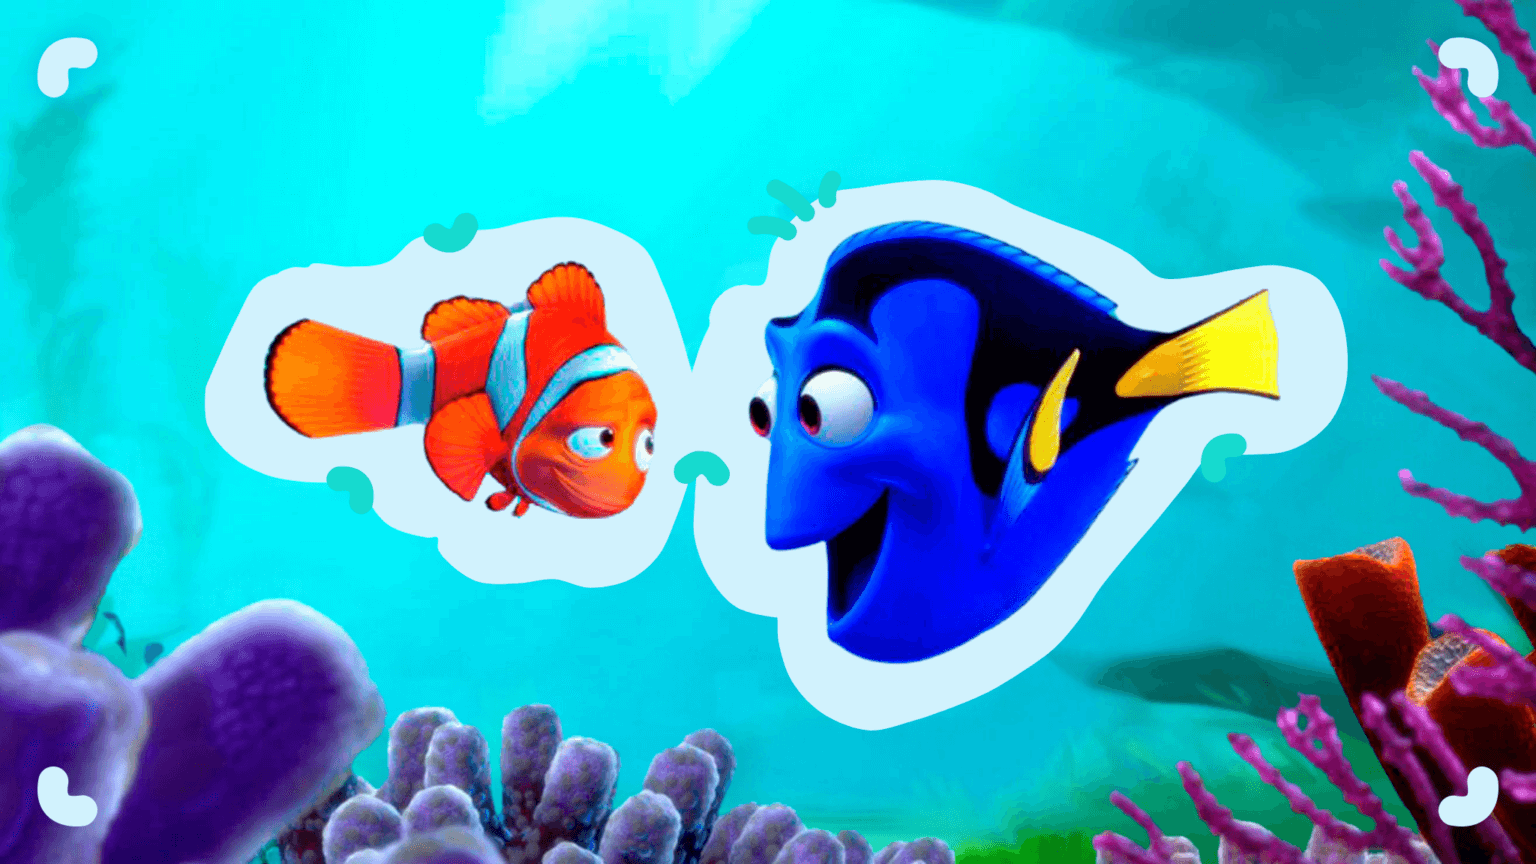 Your new hires are Dory's